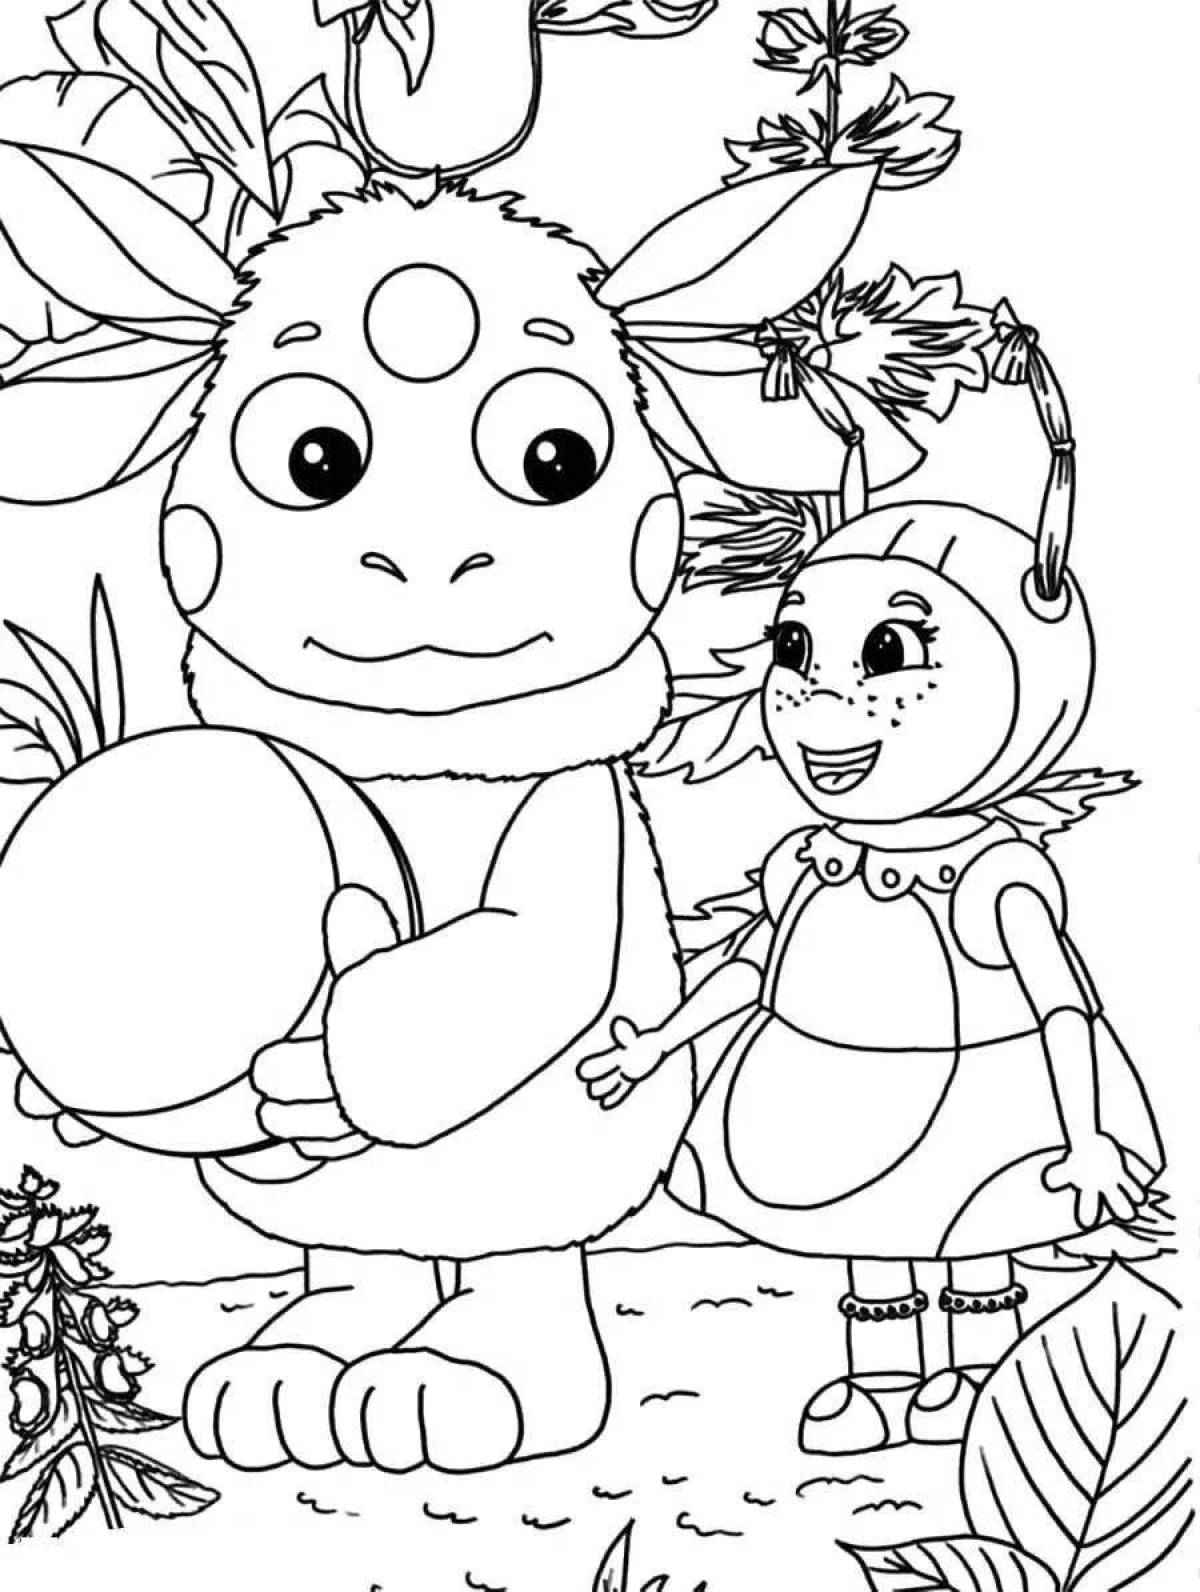 Exciting coloring book for kids